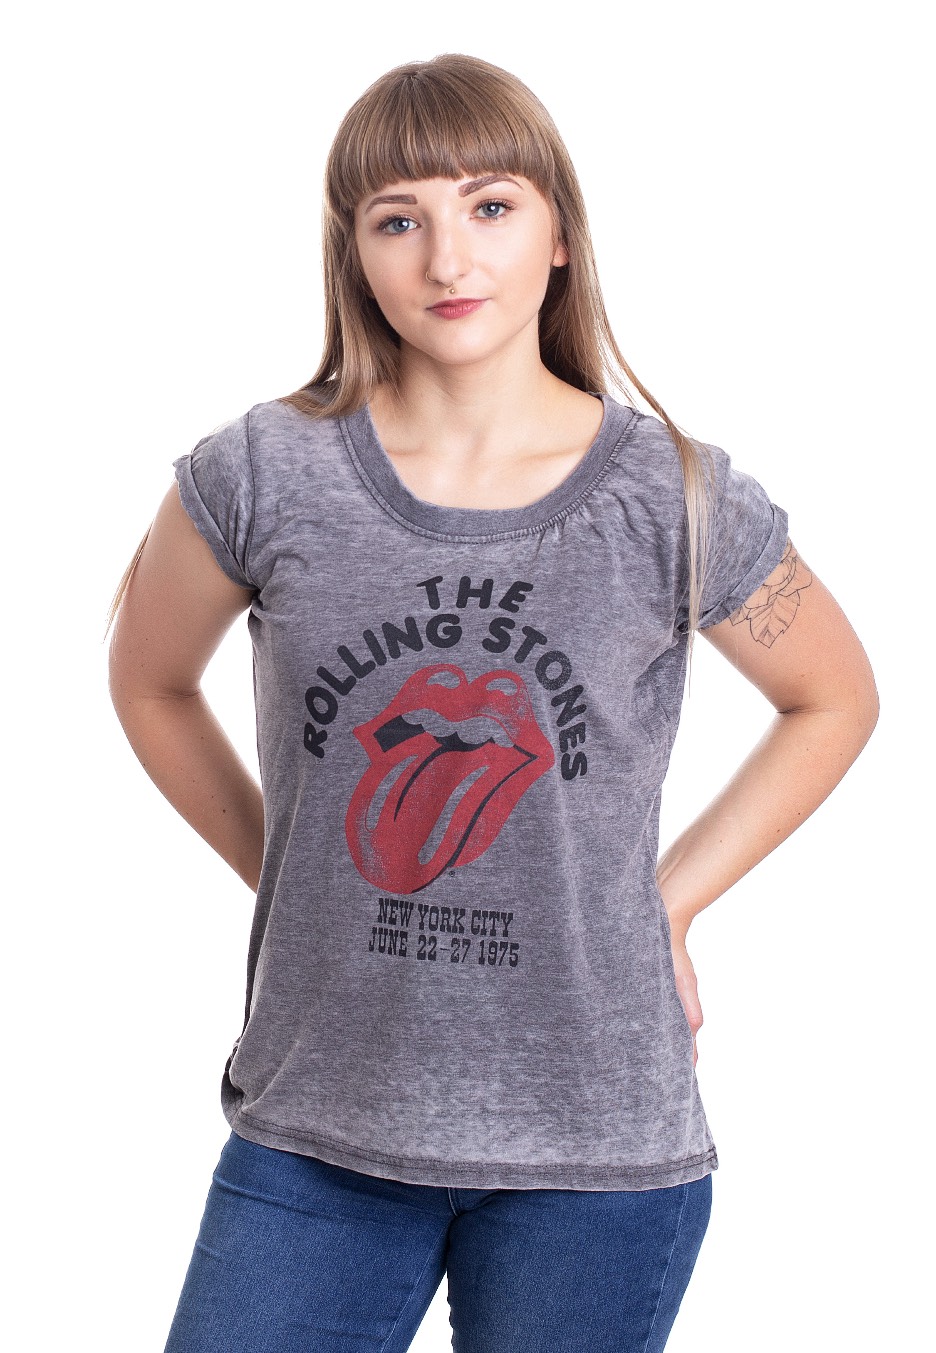 The Rolling Stones - NYC 1975 Burnout Grey - Girlies